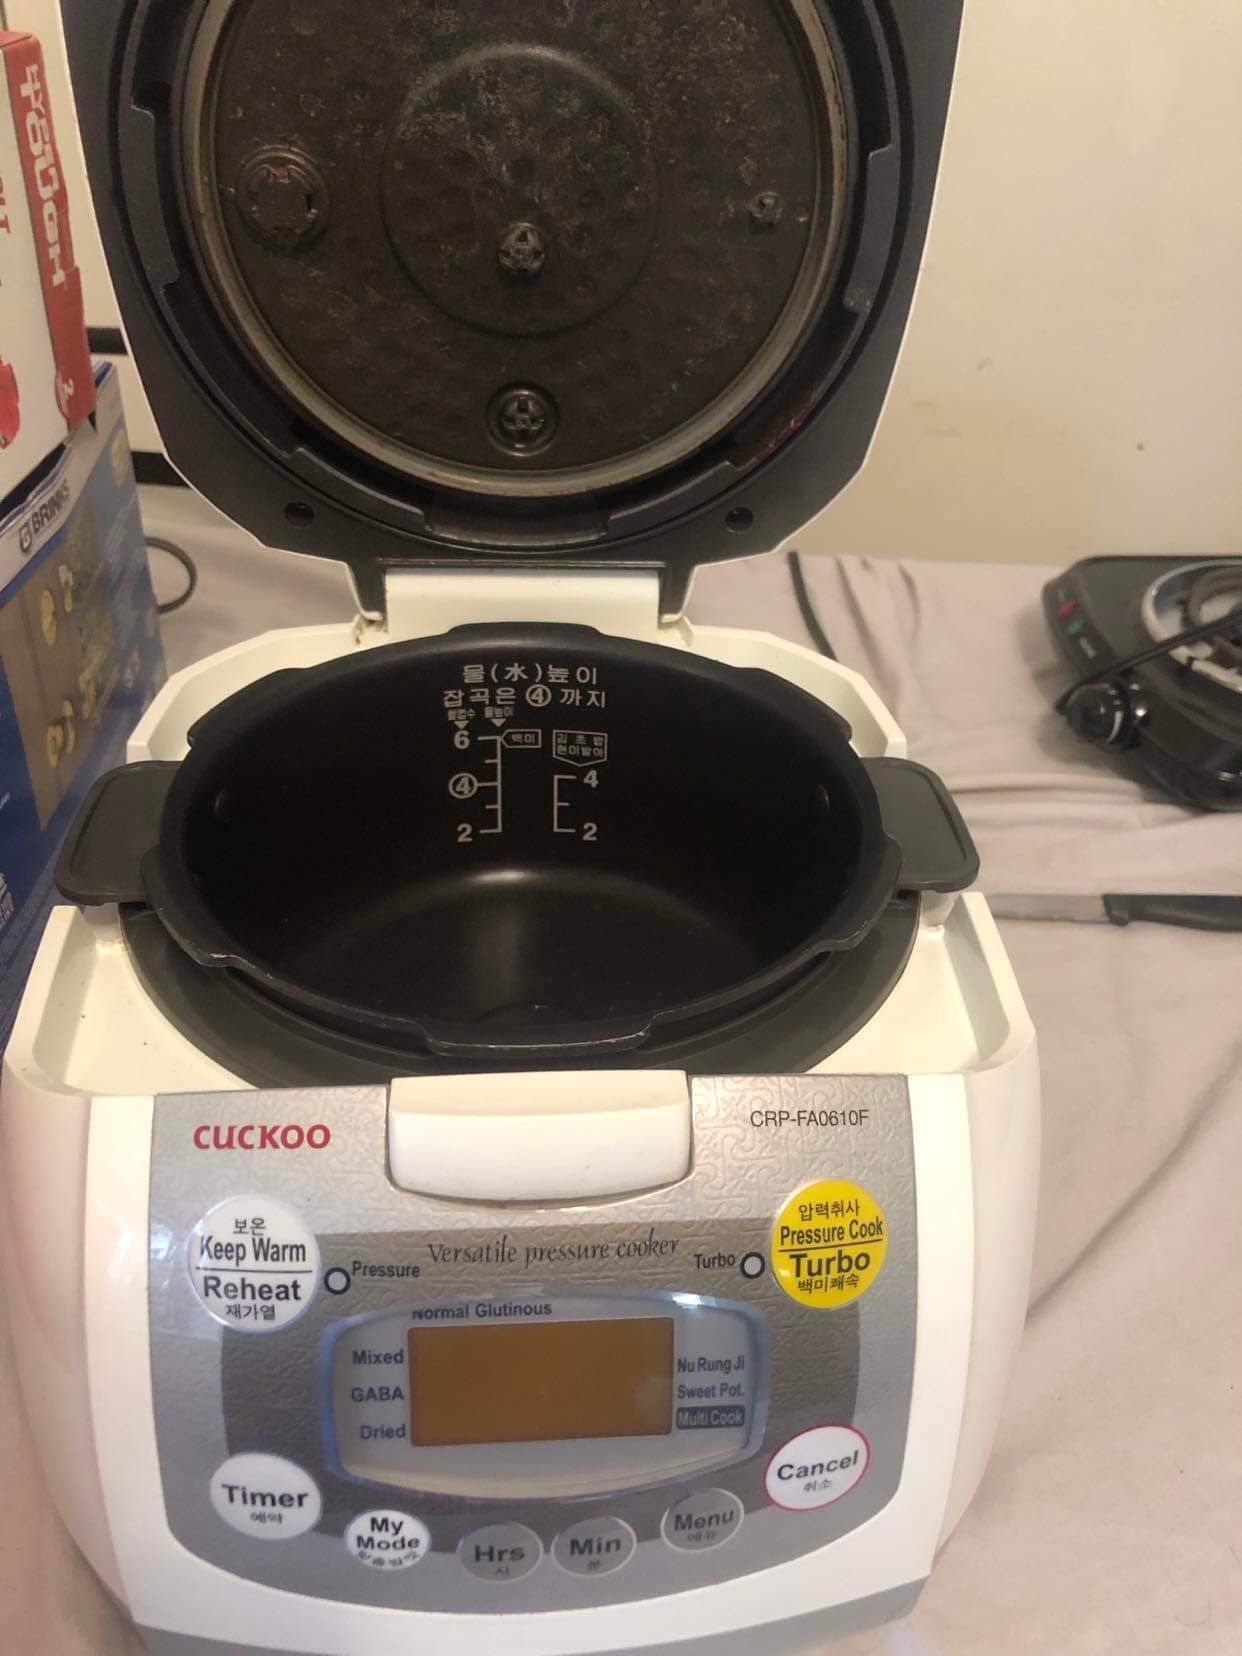 Deni 9100 Combo Cooker Deep Fryer Steamer Rice Cooker Slow Cooker All In  One ($15) for Sale in New Port Richey, FL - OfferUp